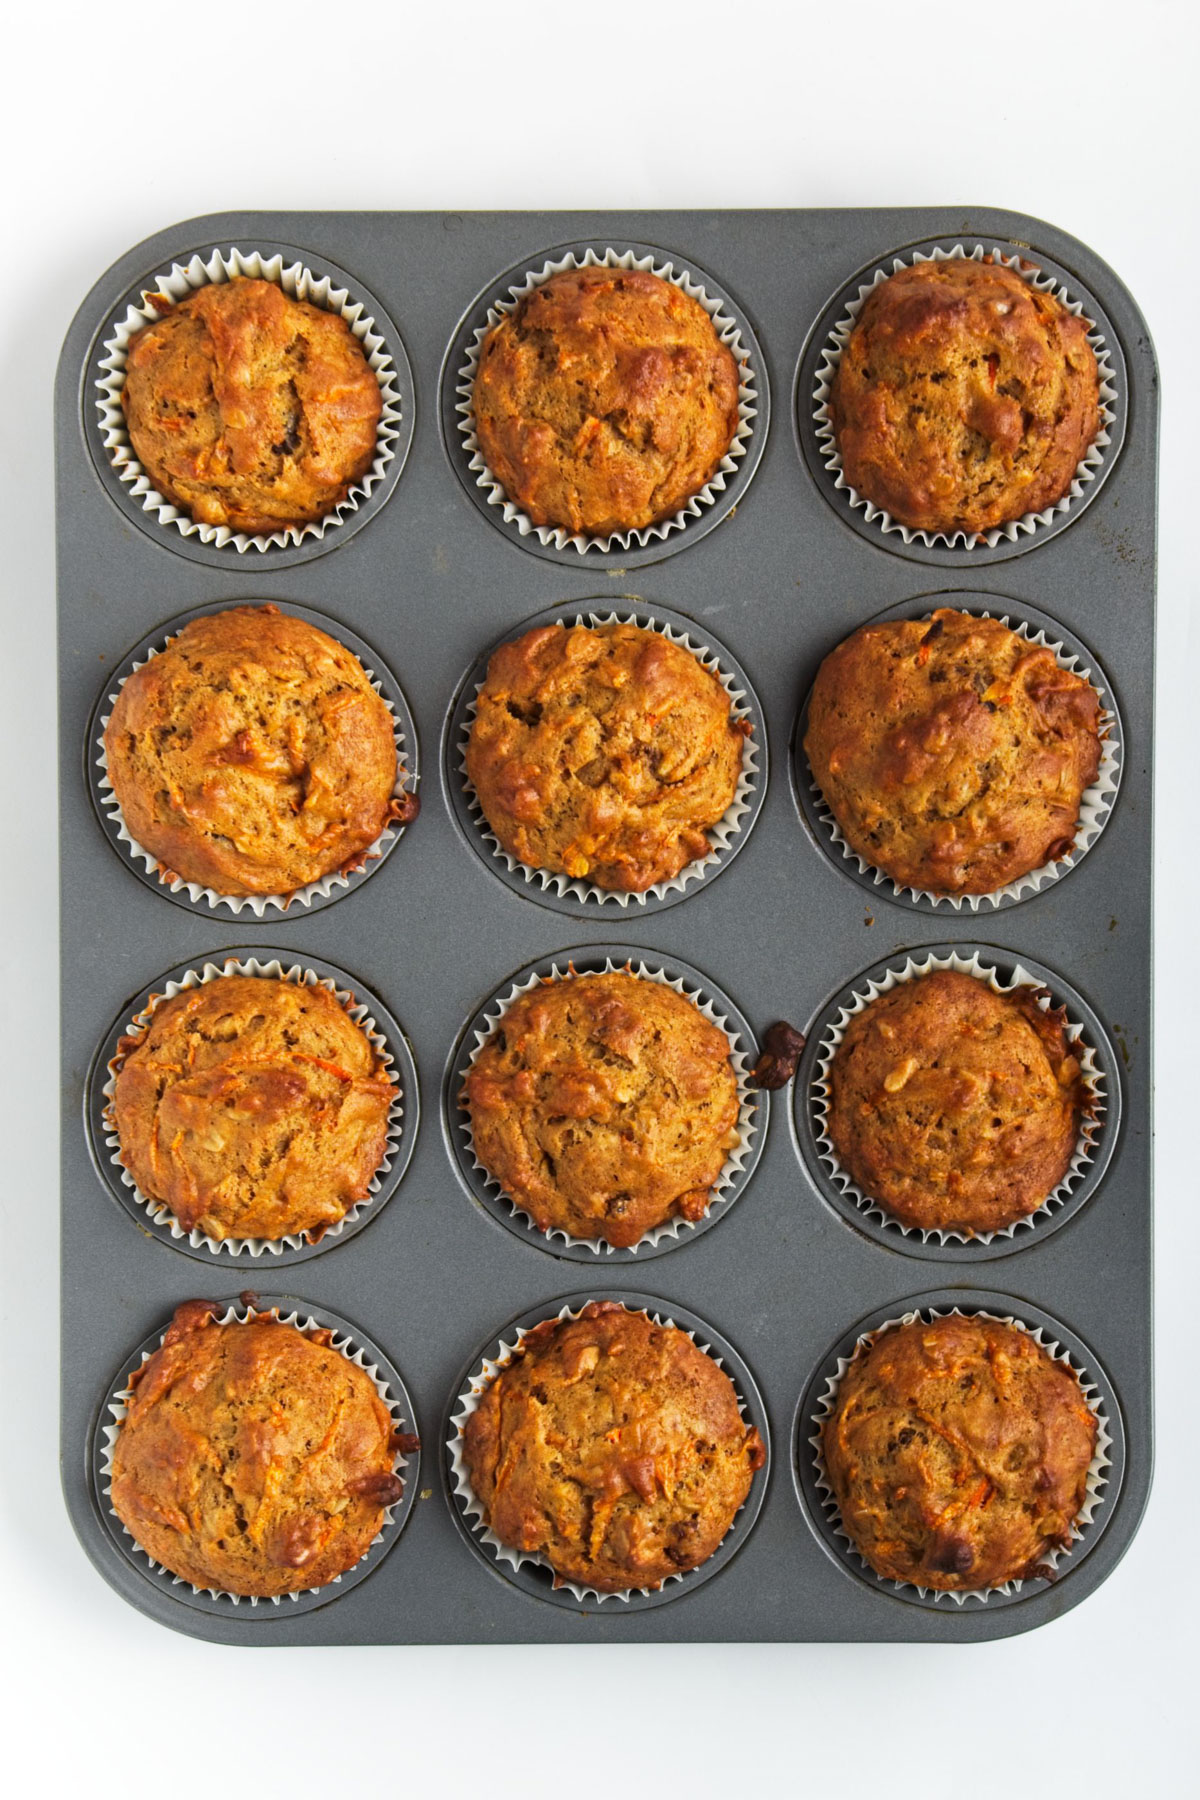 Cooked oatmeal carrot muffins in a muffin tin.